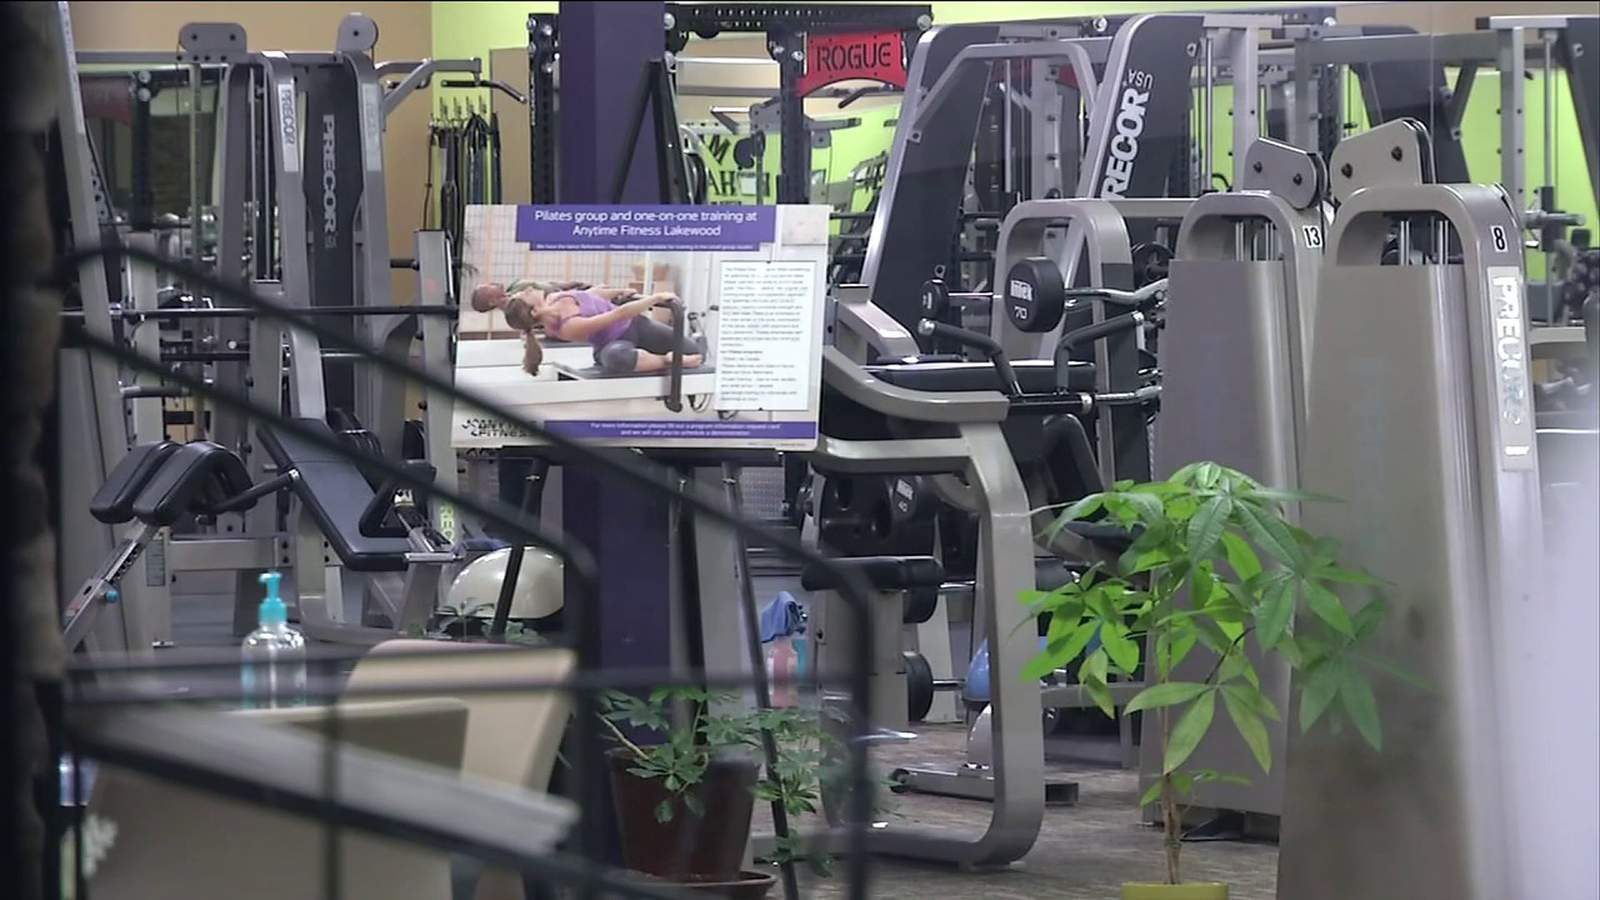 What are local gyms doing to steer clear of coronavirus?